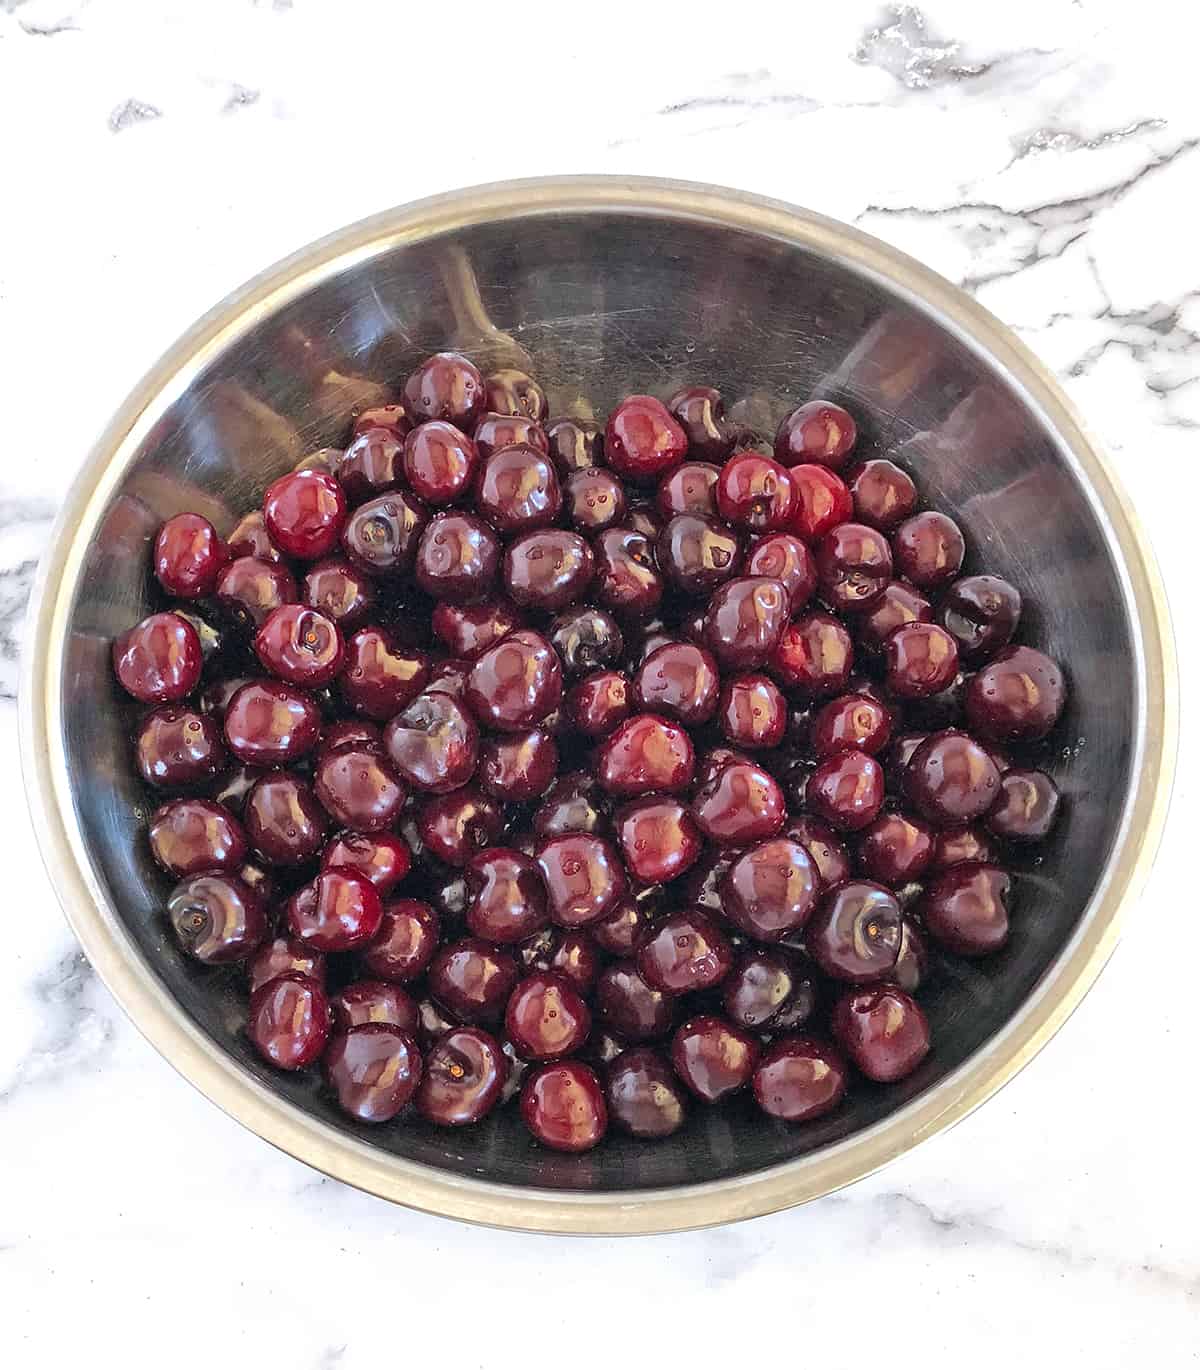 If you're using frozen cherries I recommend rinsing them as well since they are usually not rinsed before freezing.